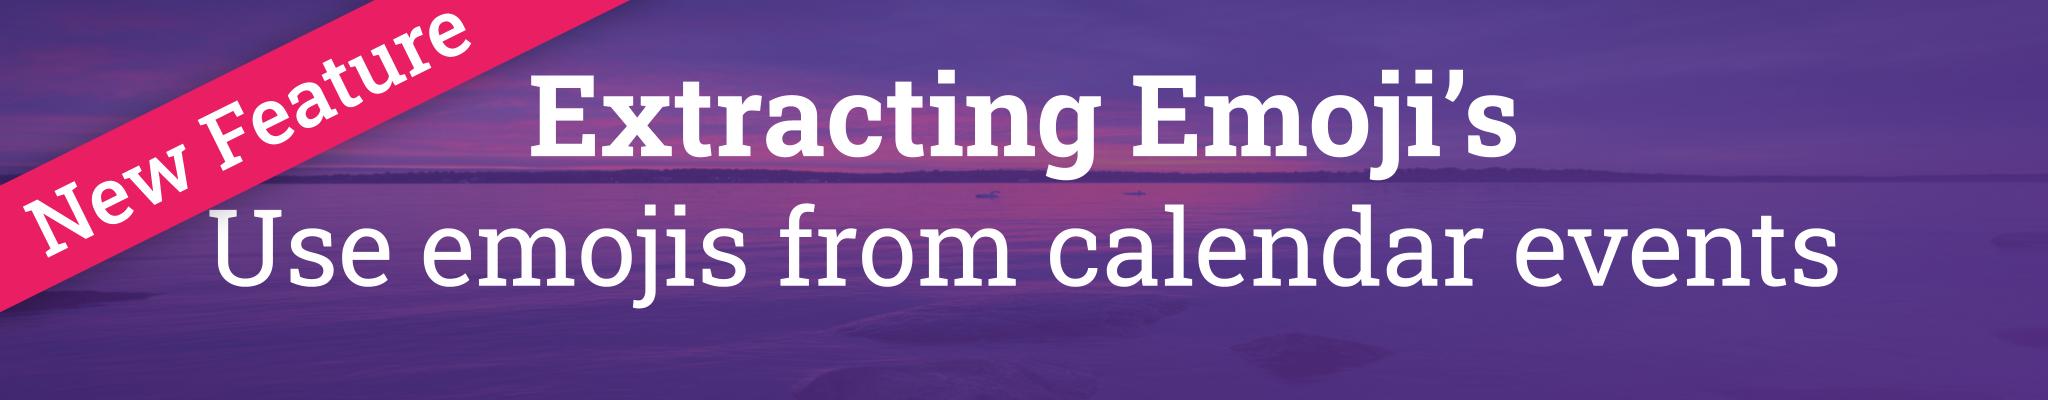 Extracting Emoji’s: Use emojis from calendar events 🎉